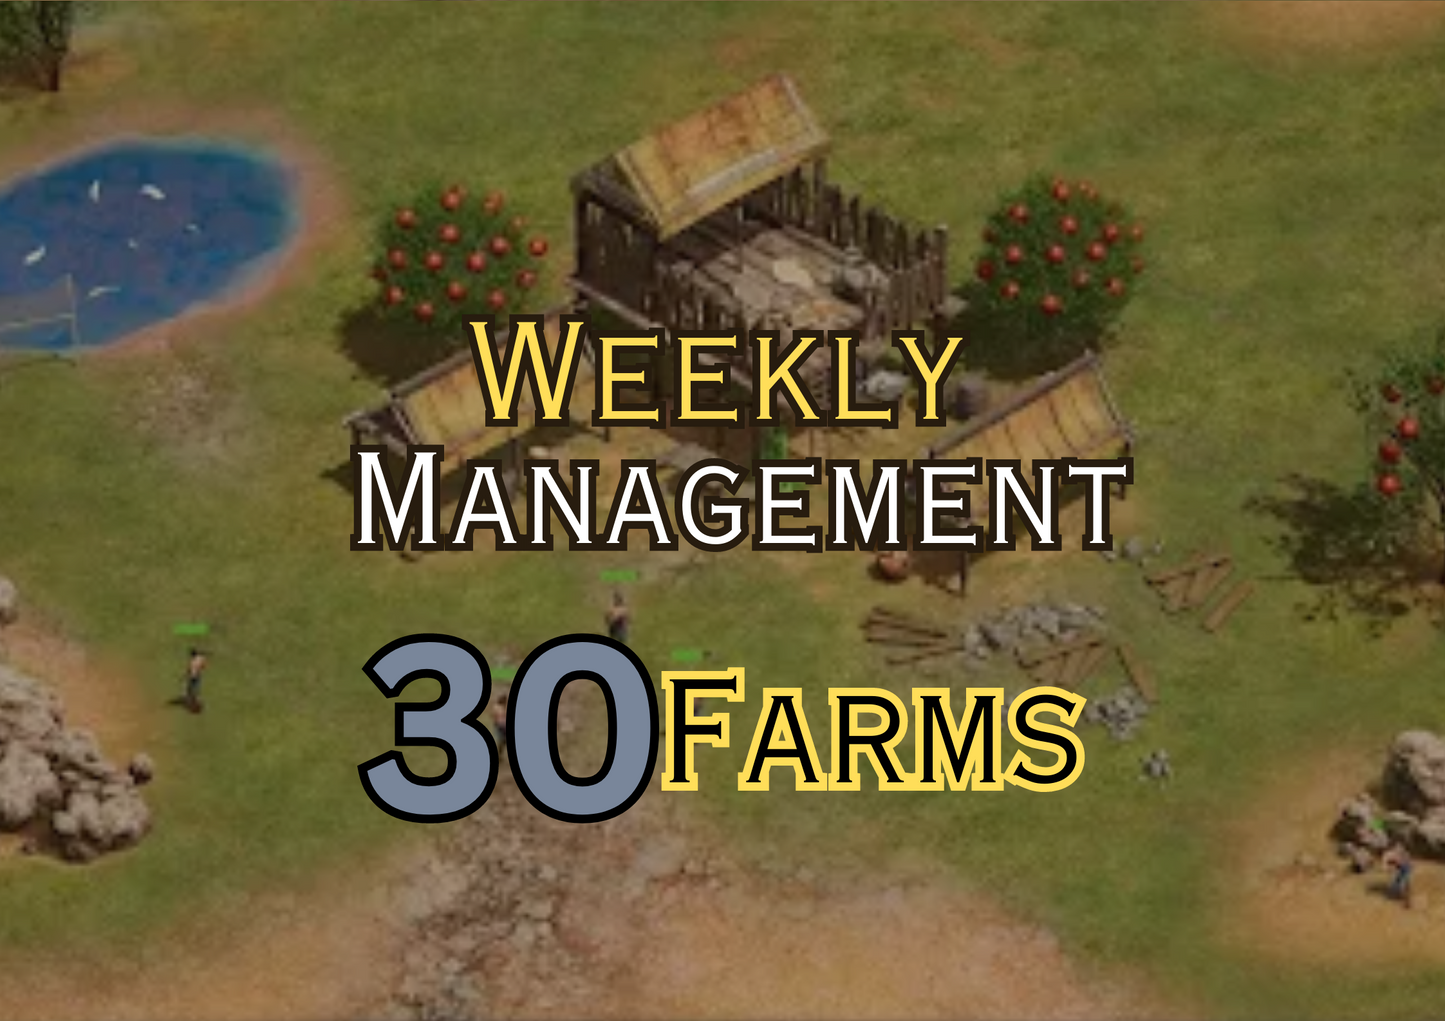 Weekly Management for 30 farms